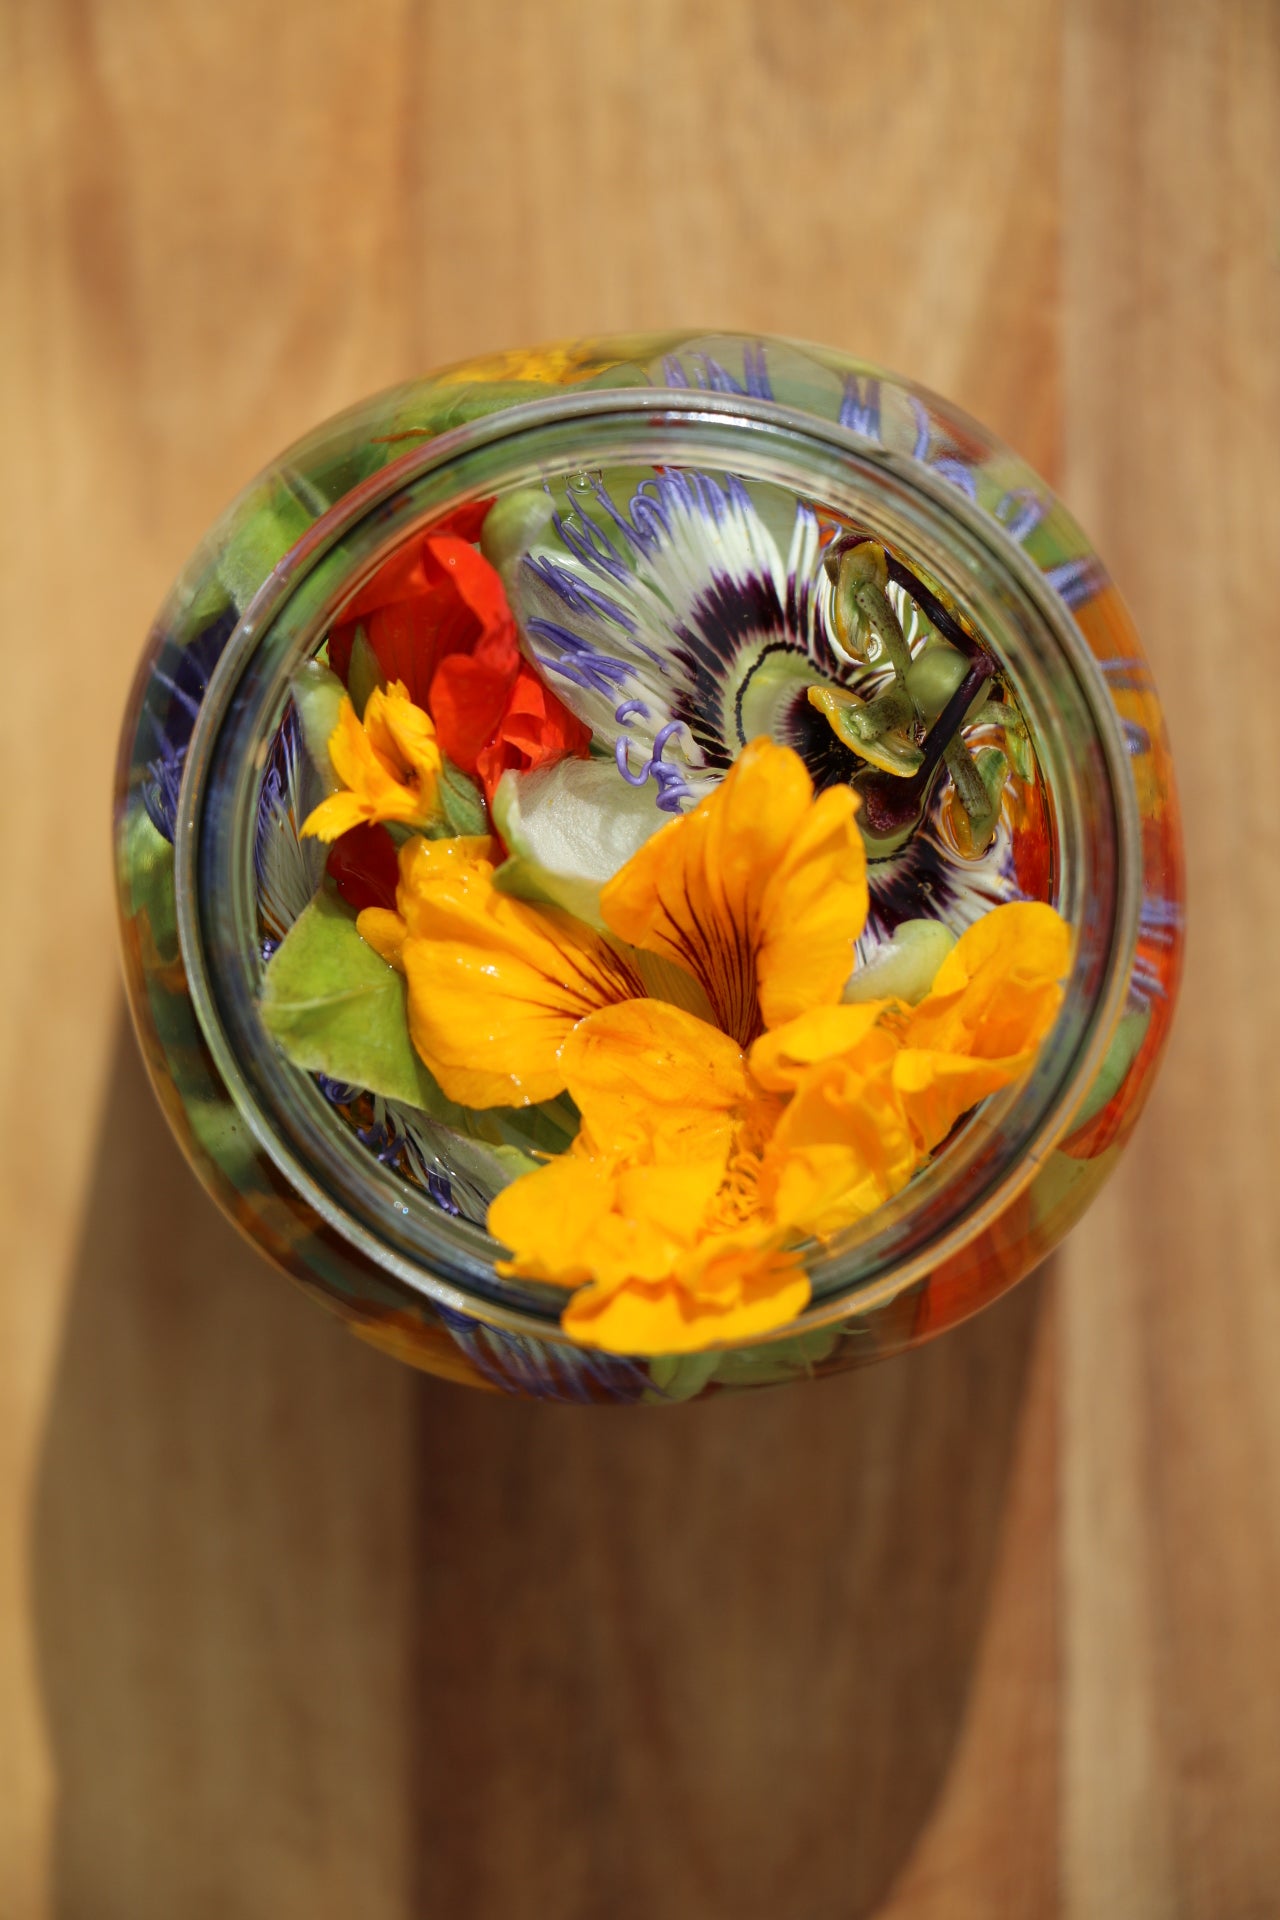 how to prepare a flower tincture at home